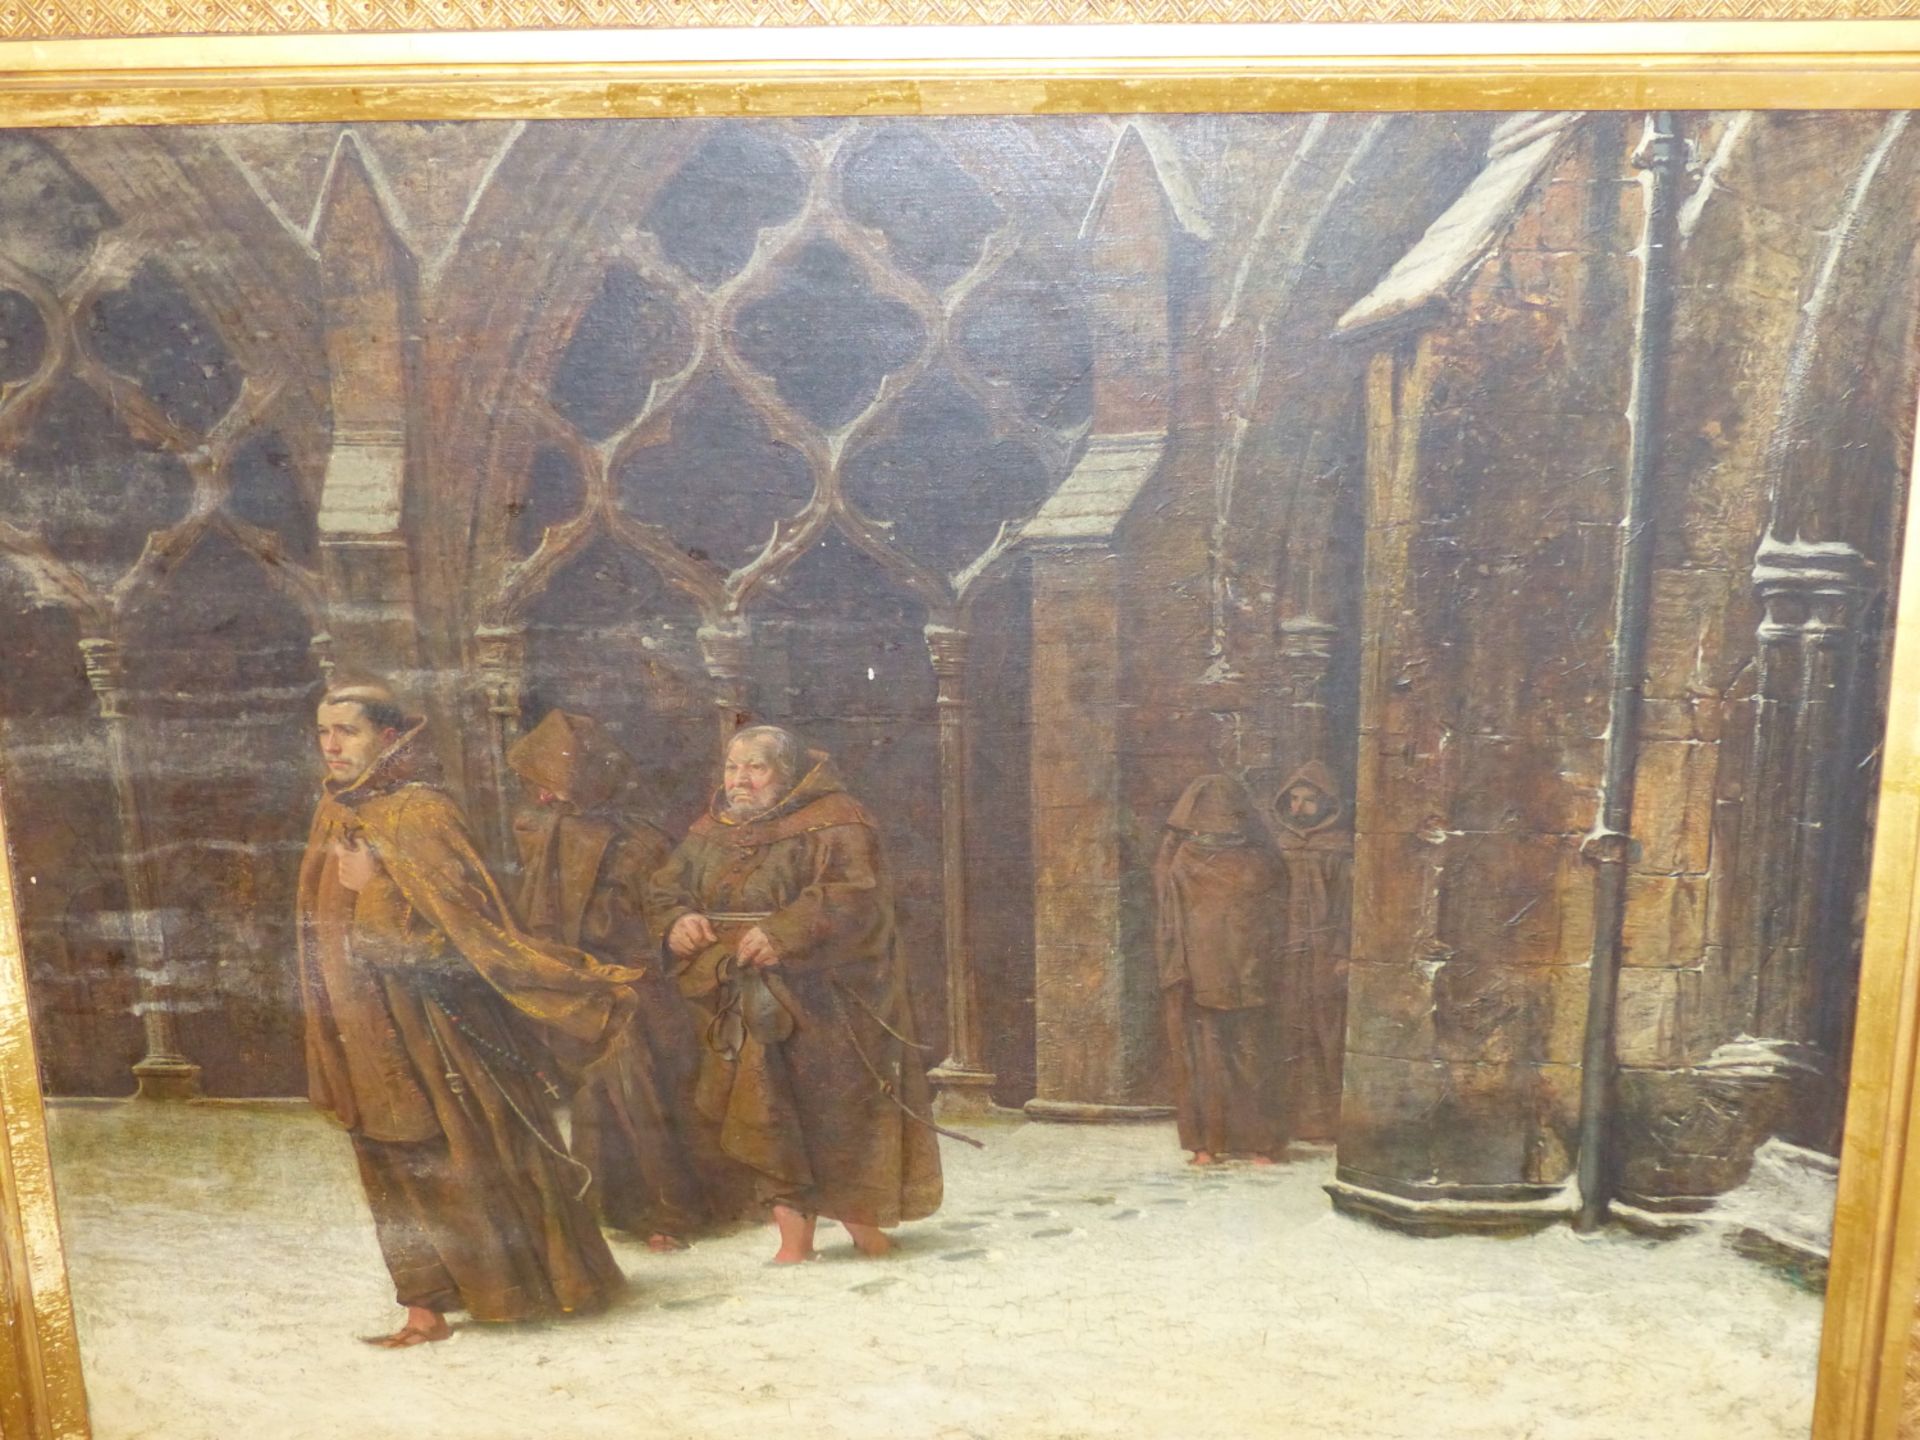 ALFRED TOURRIER (1836-1892) "MATINS" -MONKS ATTENDING MORNING PRAYER, OIL ON CANVAS. INITIALLED - Image 4 of 8